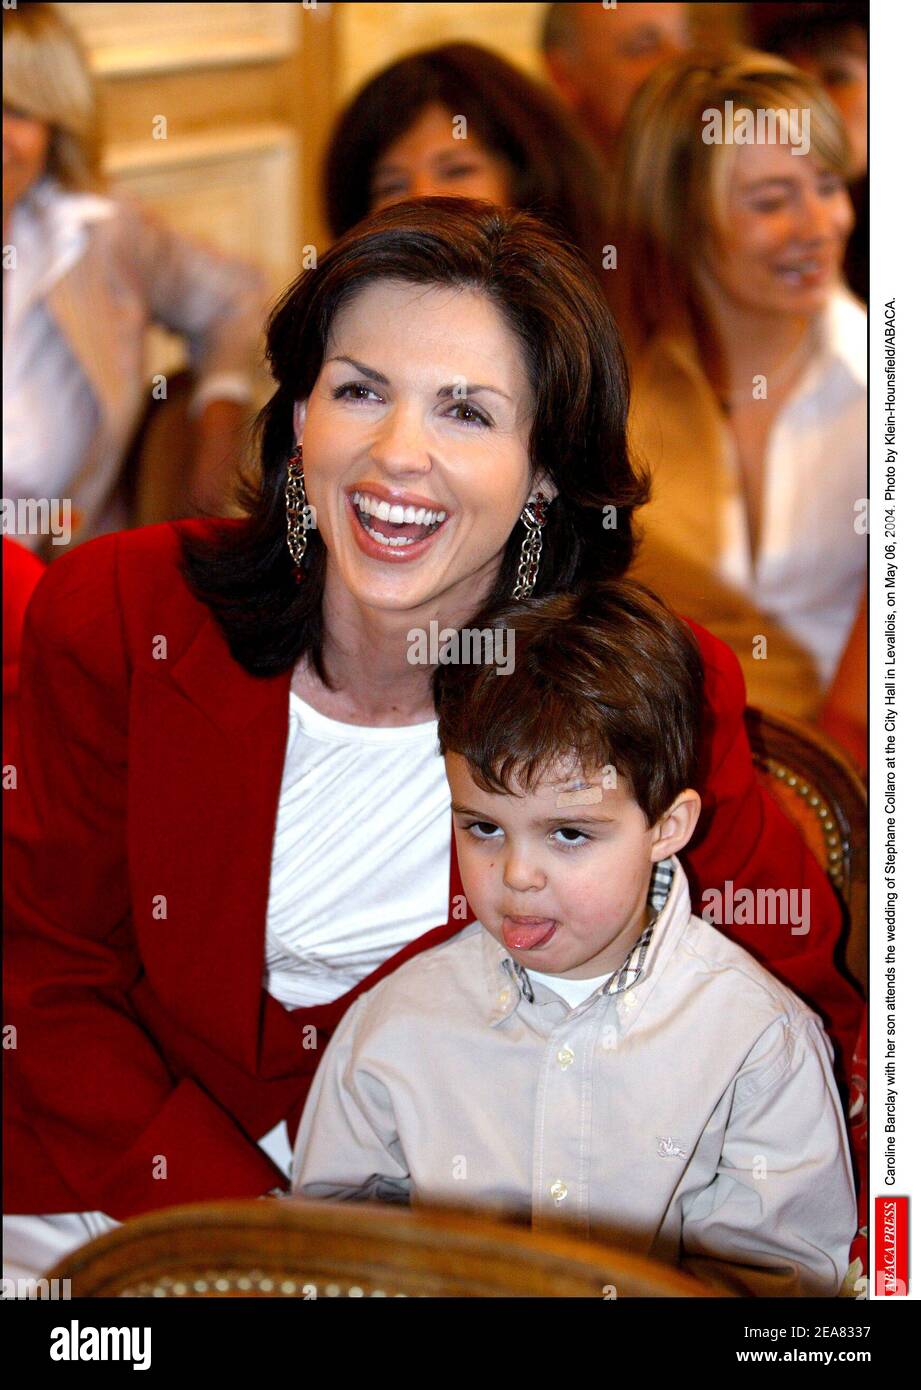 Caroline Barclay with her son attends the wedding of Stephane Collaro at the City Hall in Levallois, on May 06, 2004. Photo by Klein-Hounsfield/ABACA. Stock Photo